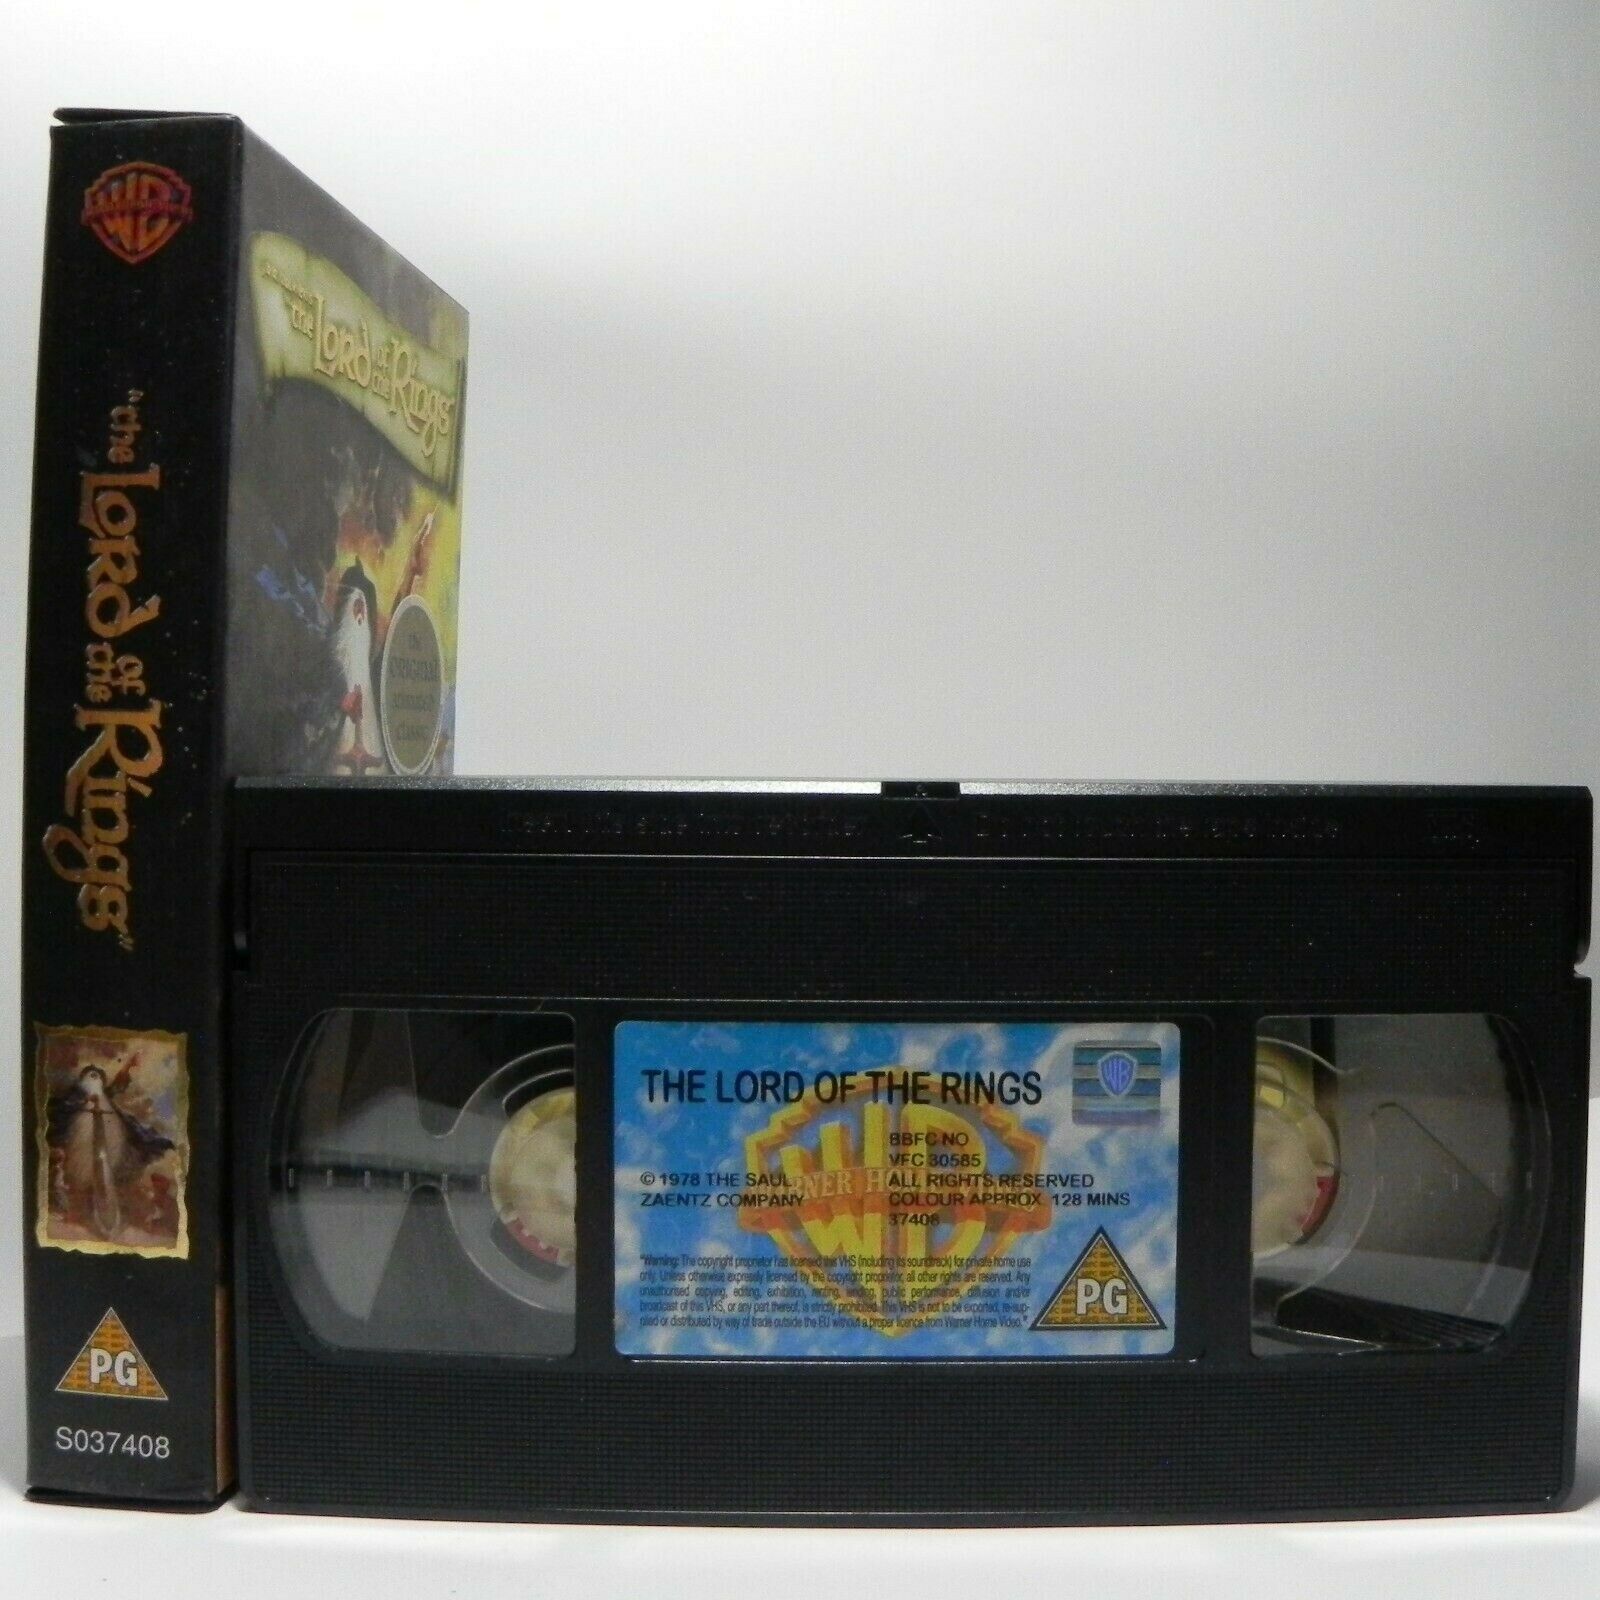 The Lord Of The Rings - Animated Classic - By JRR.Tolkien - Children's - VHS-